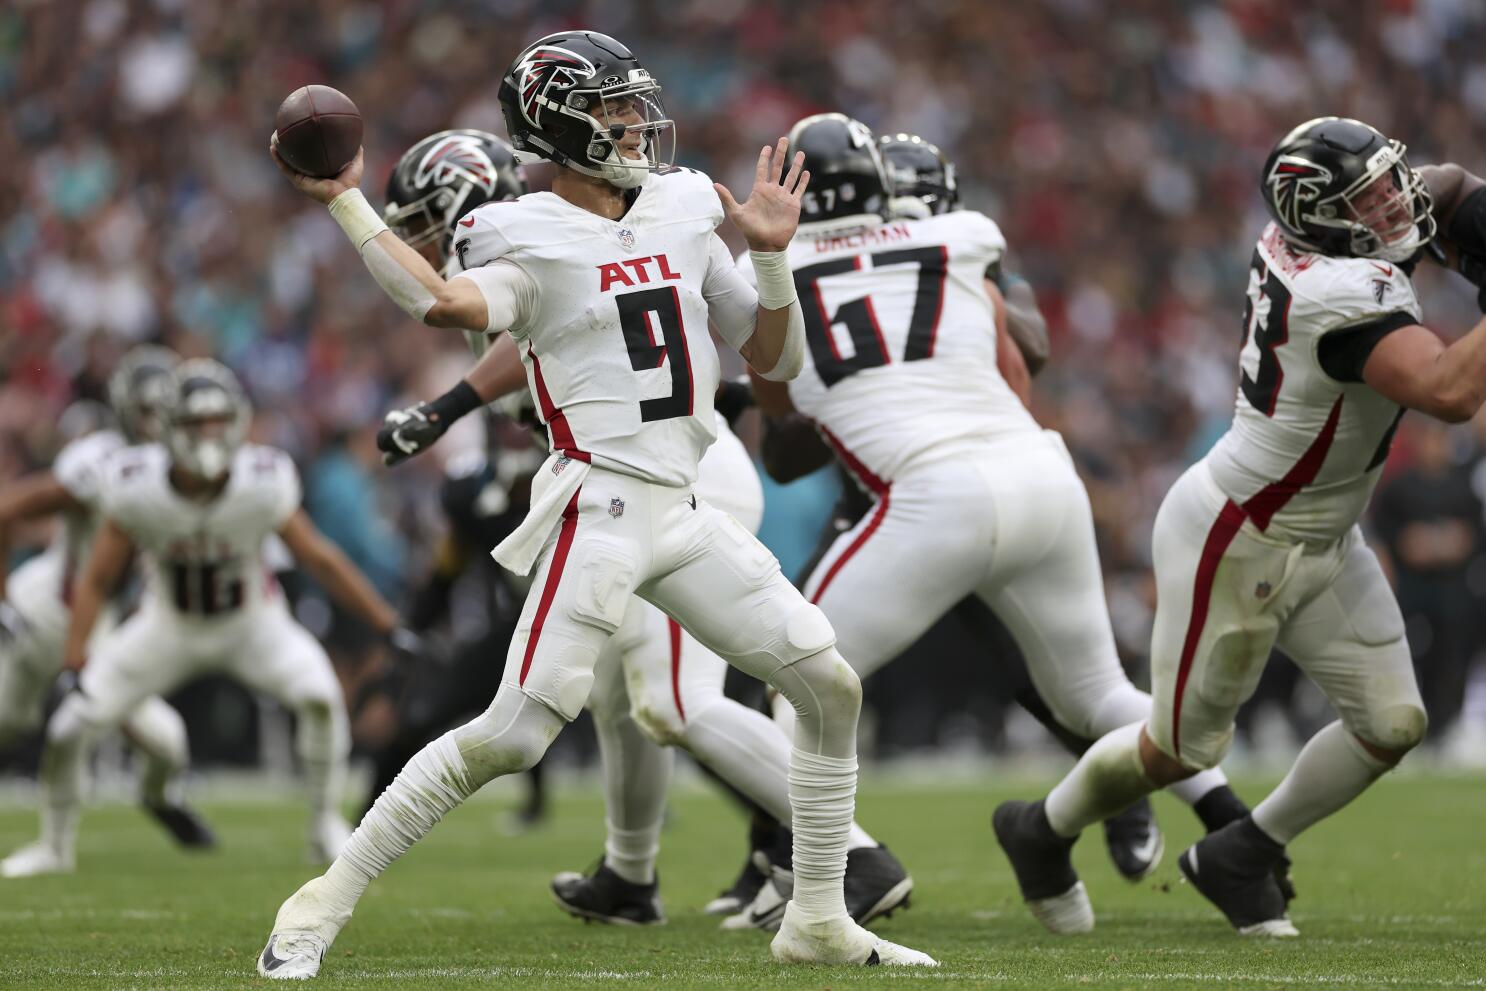 Jags look to snap 9-game skid against Texans on Sunday - The San